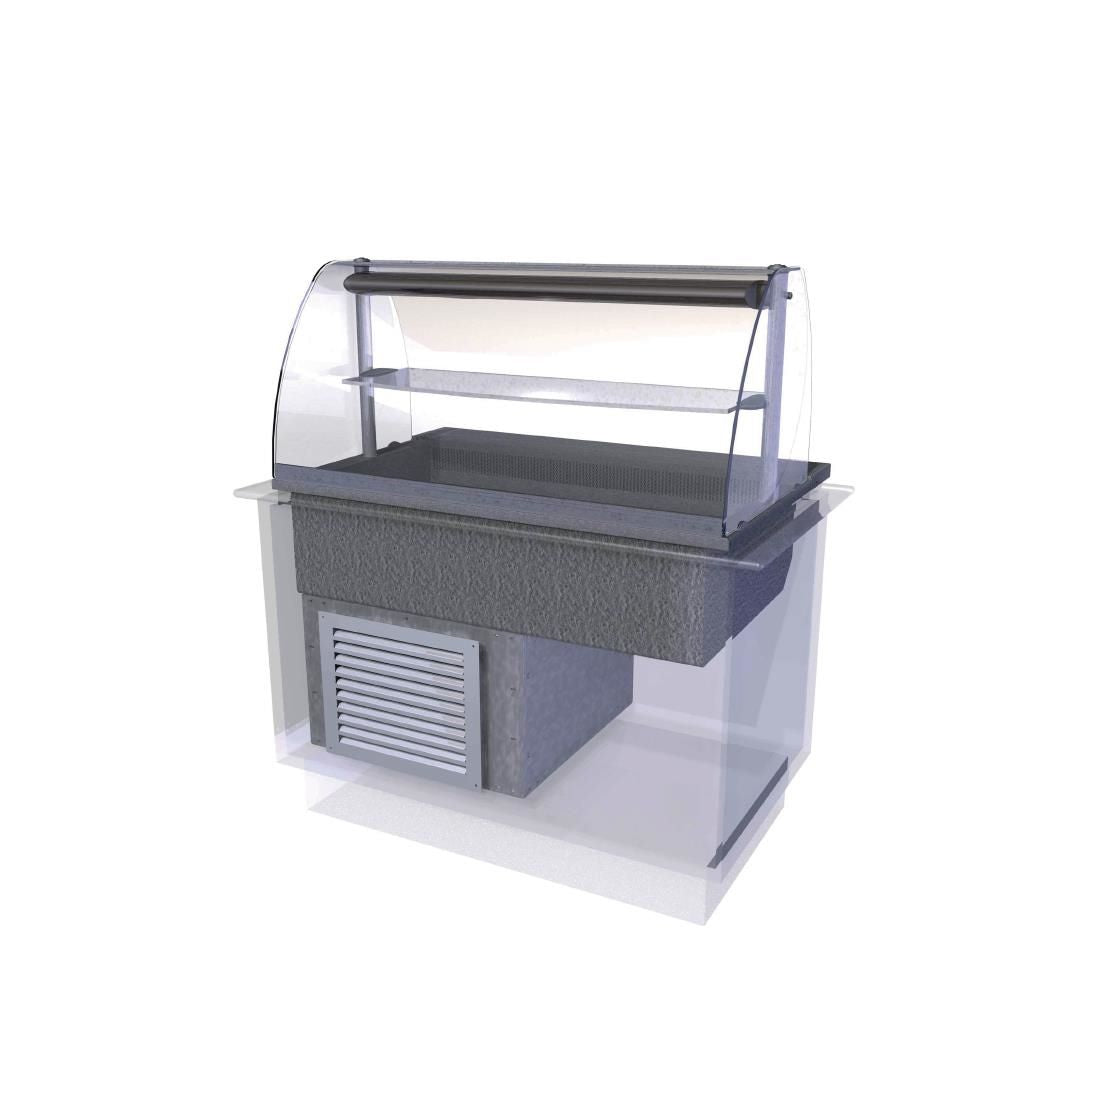 CW605 Designline Drop In Chilled Deli Serve Over Counter 1175mm JD Catering Equipment Solutions Ltd